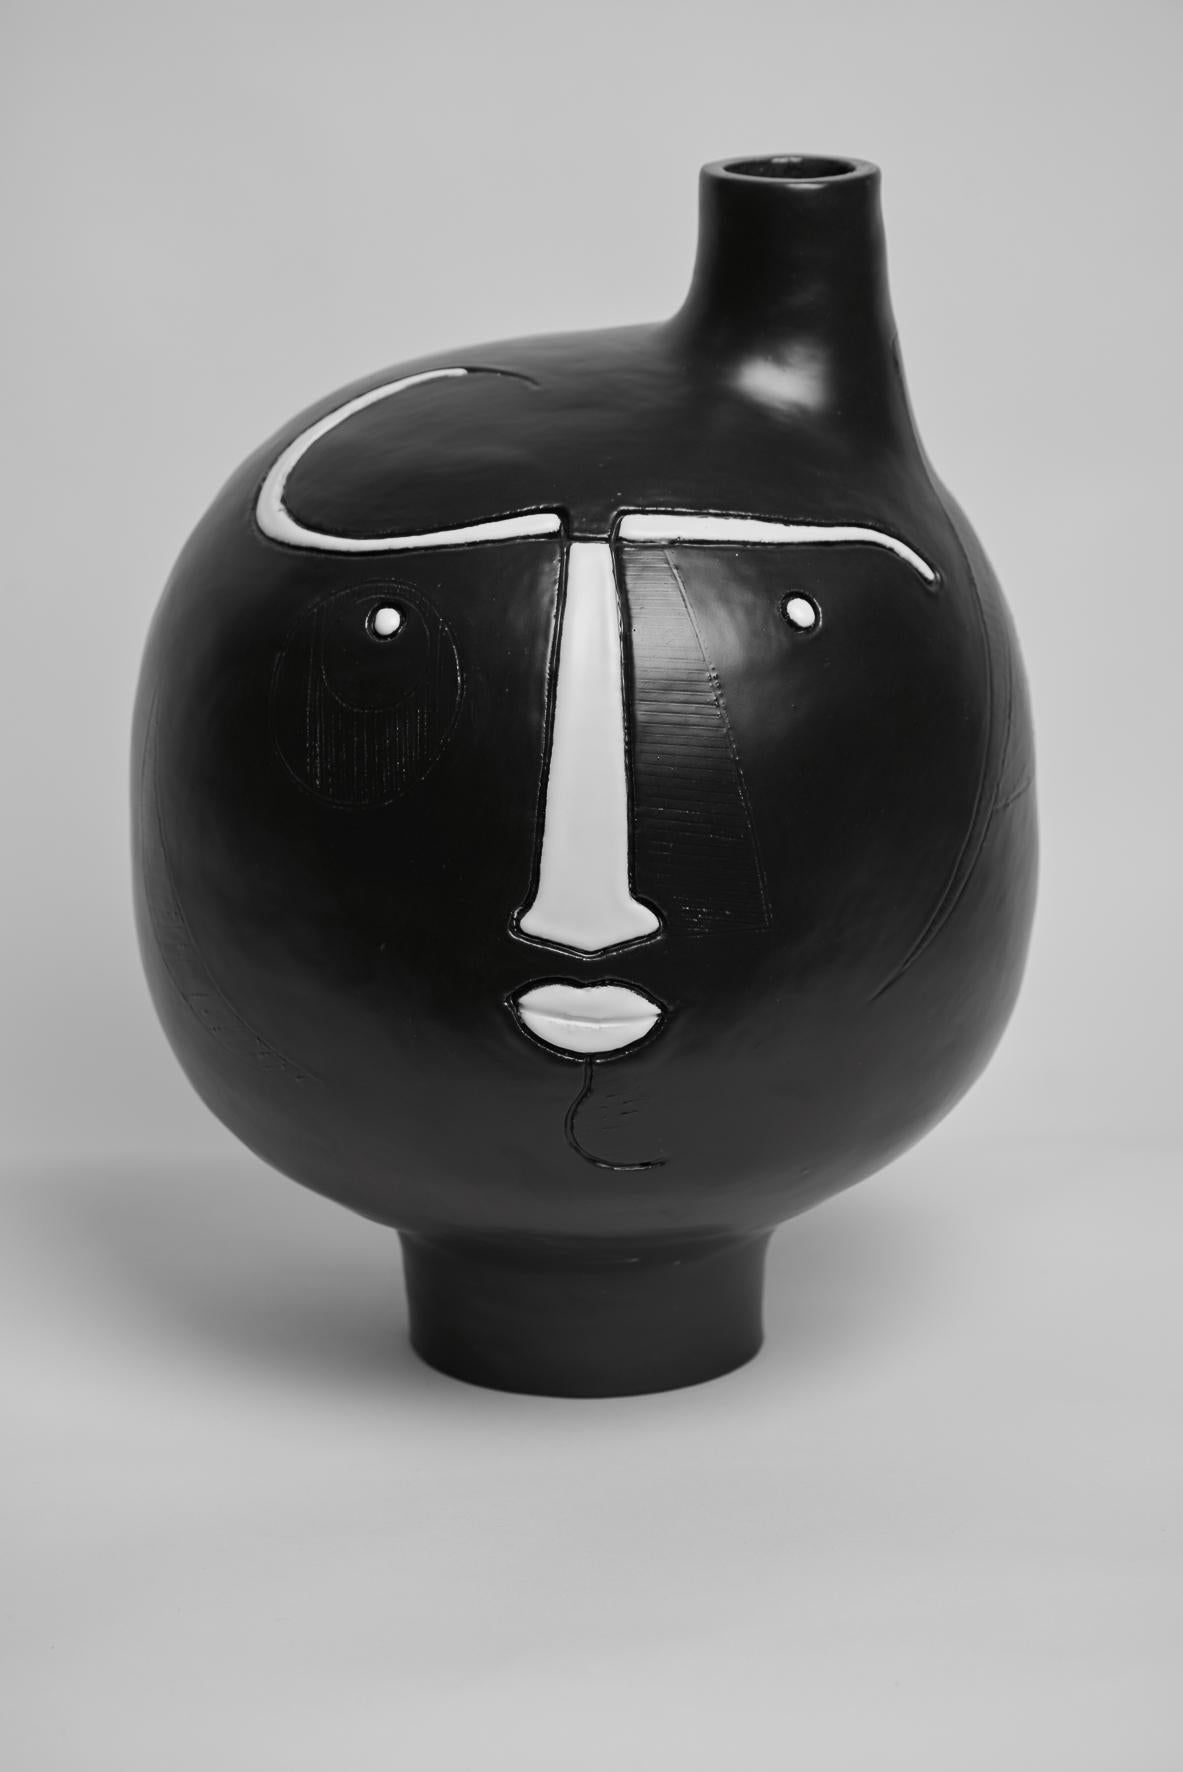 Large hand-sculpted ceramic base lamp, stylized face with engraved lines , stoneware glazed in black and white enamel.

One of a kind handmade piece signed by the French ceramicists Dalo , 2018

The height dimension is for the ceramic sculpture